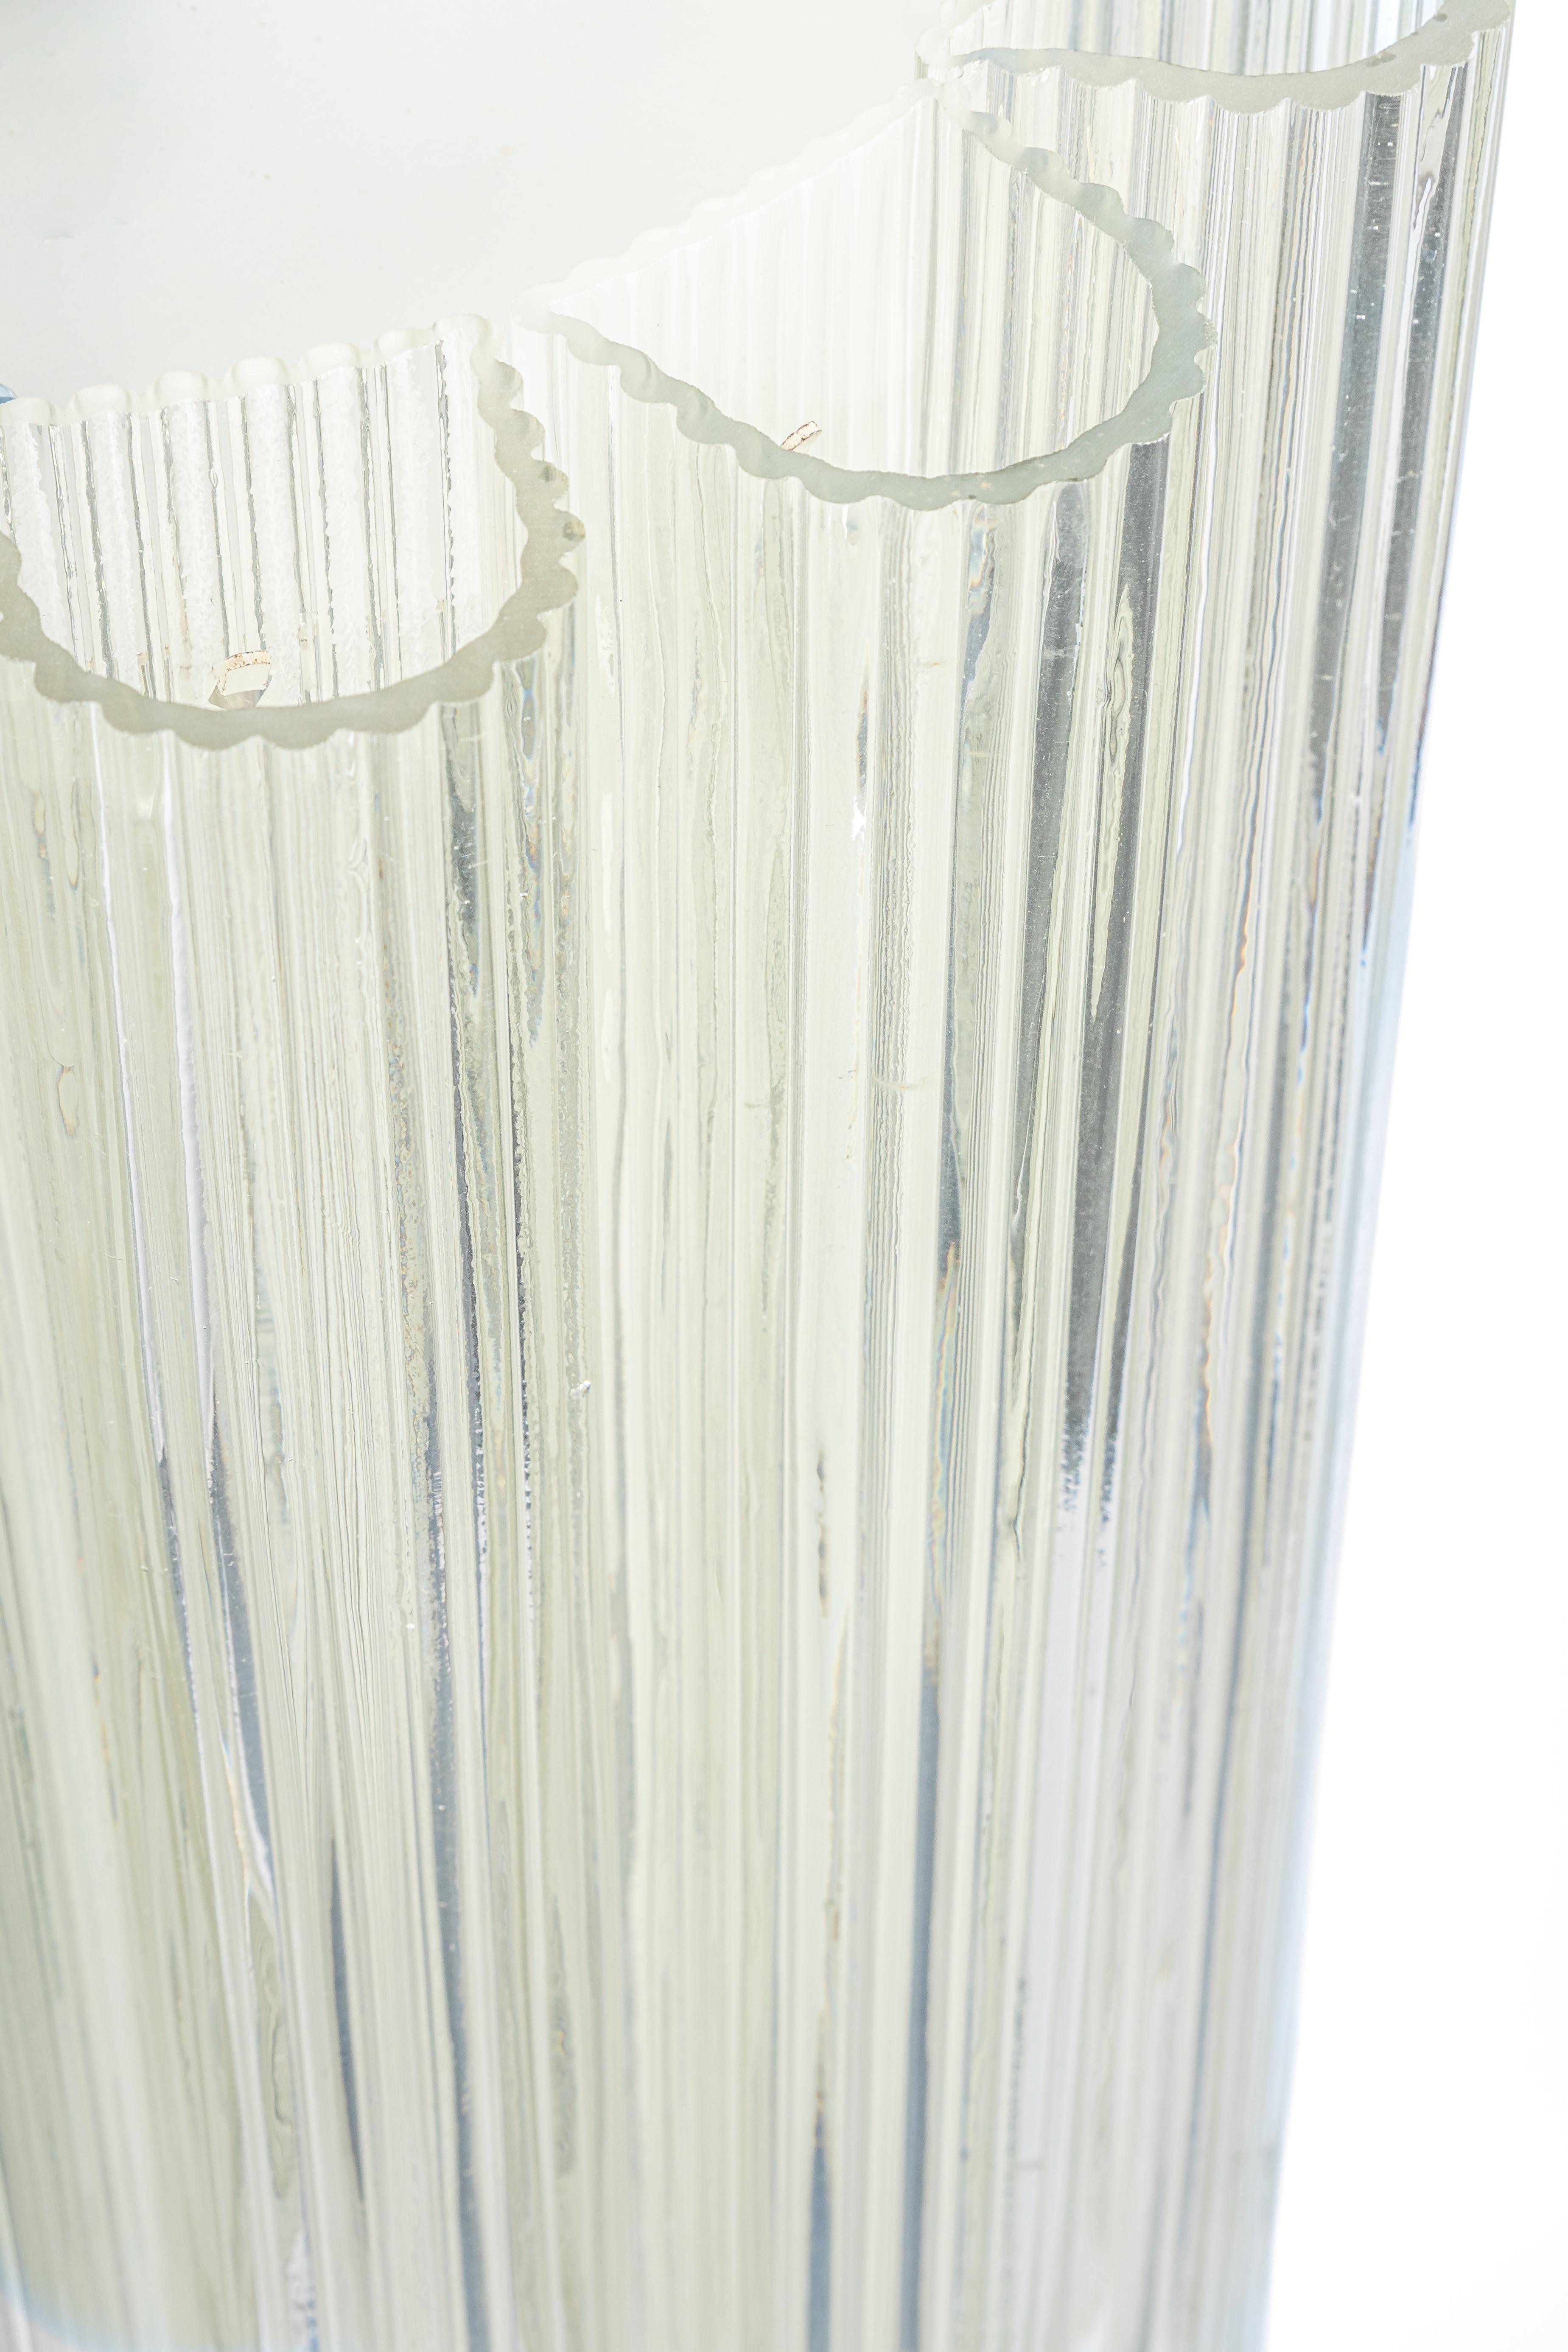 1 of 2 Cylindrical Pendant Fixture with Crystal Glass by Doria, Germany, 1960s For Sale 4